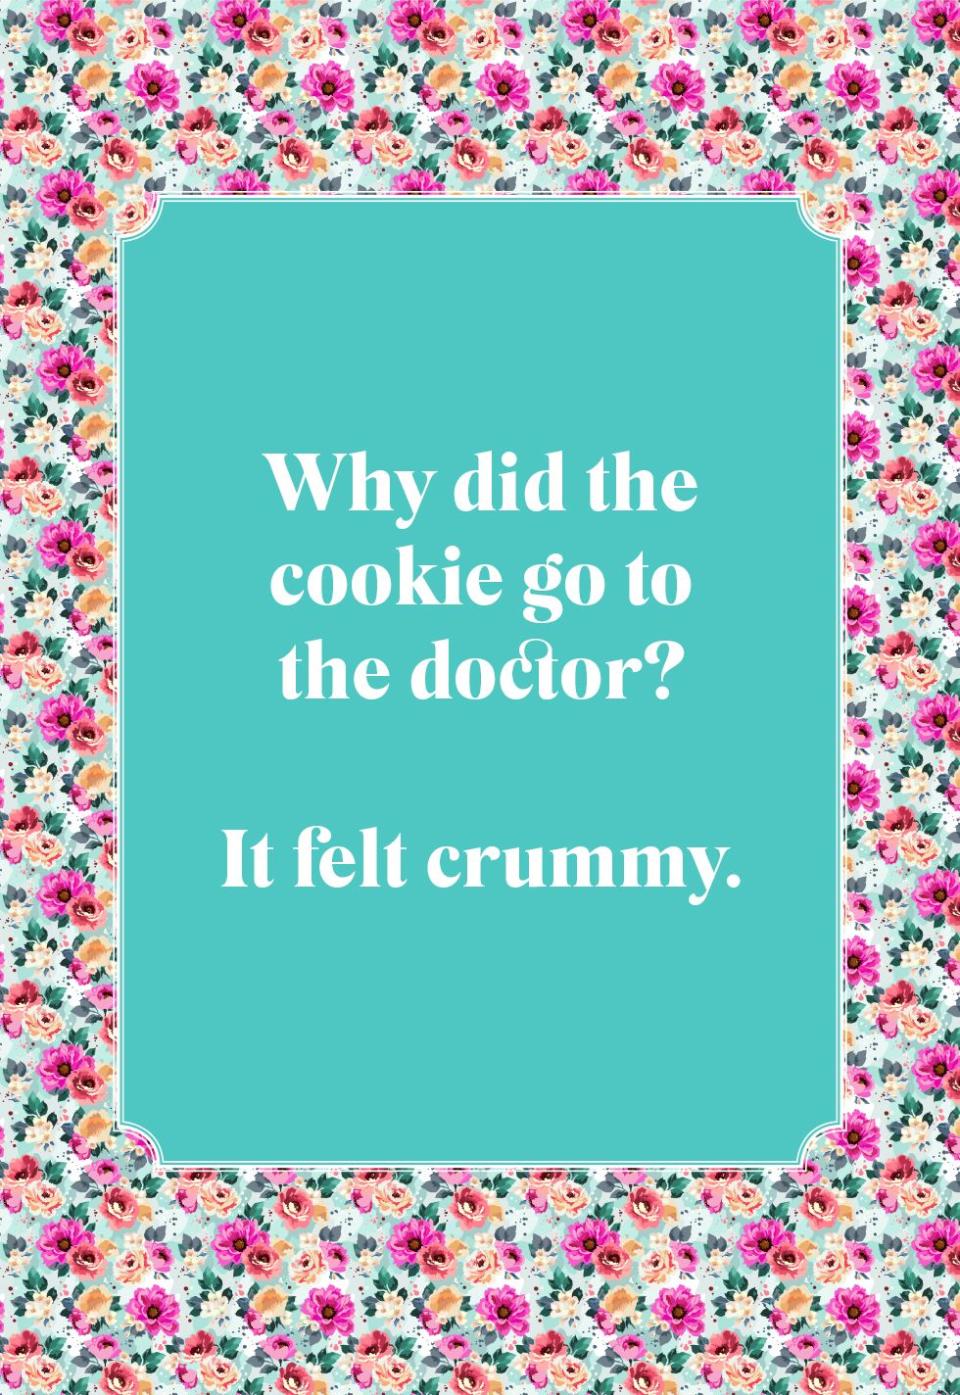 Why did the cookie go to the doctor?